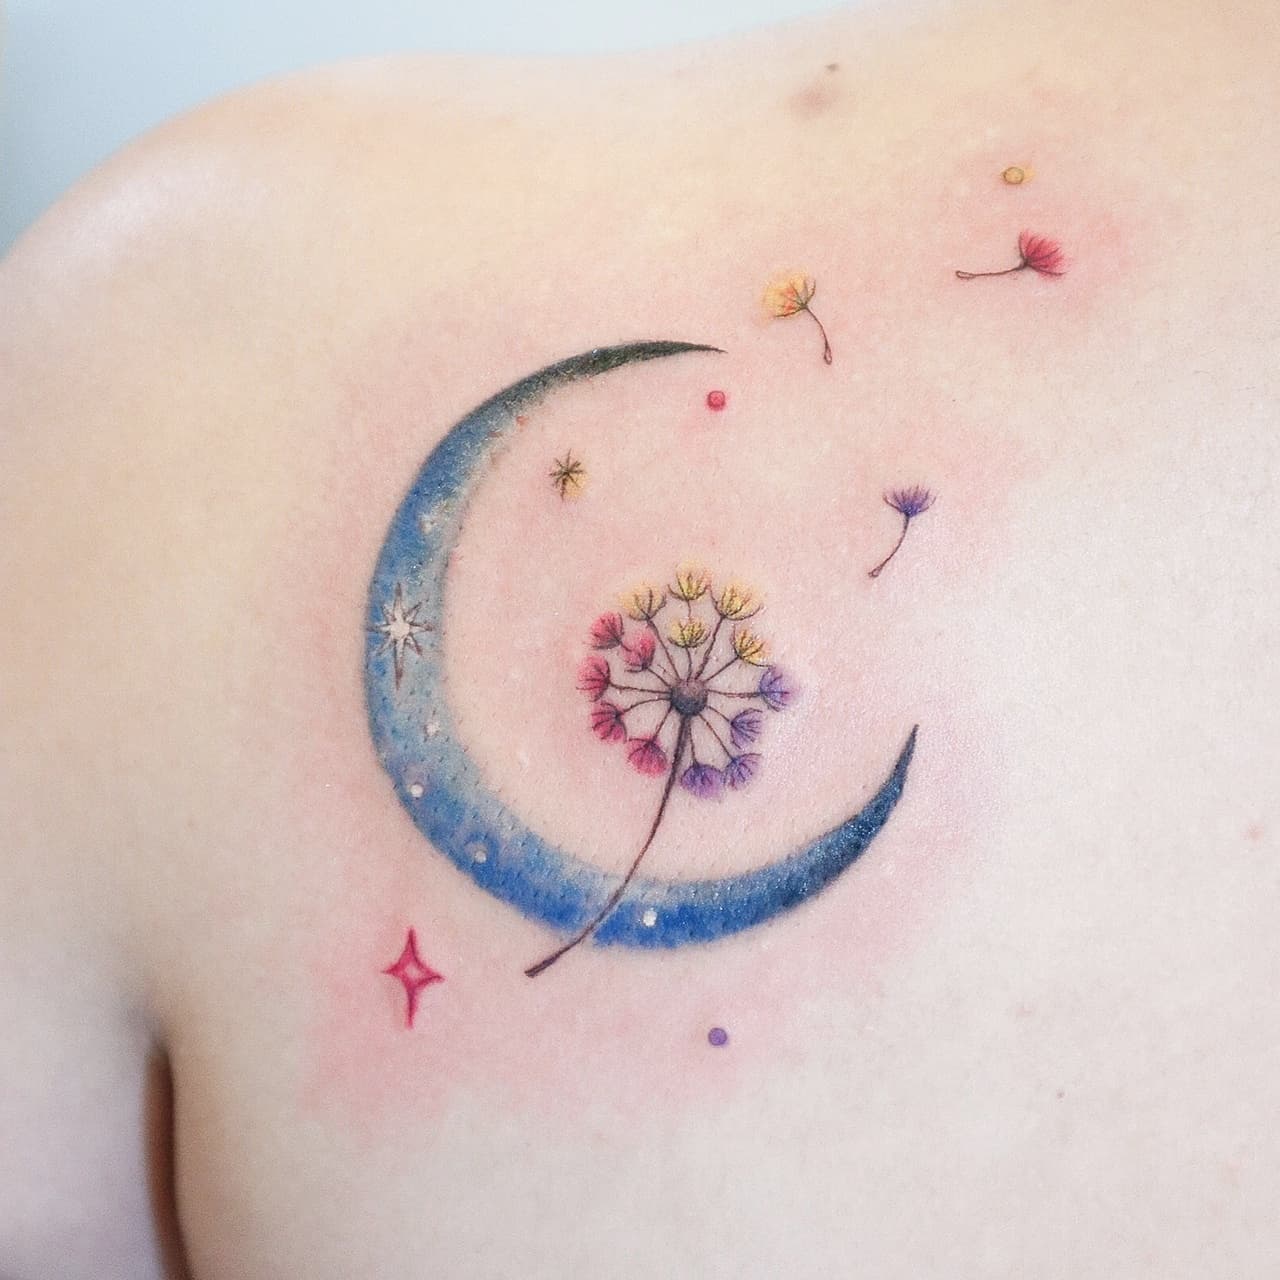 Dandelion with moon and stars